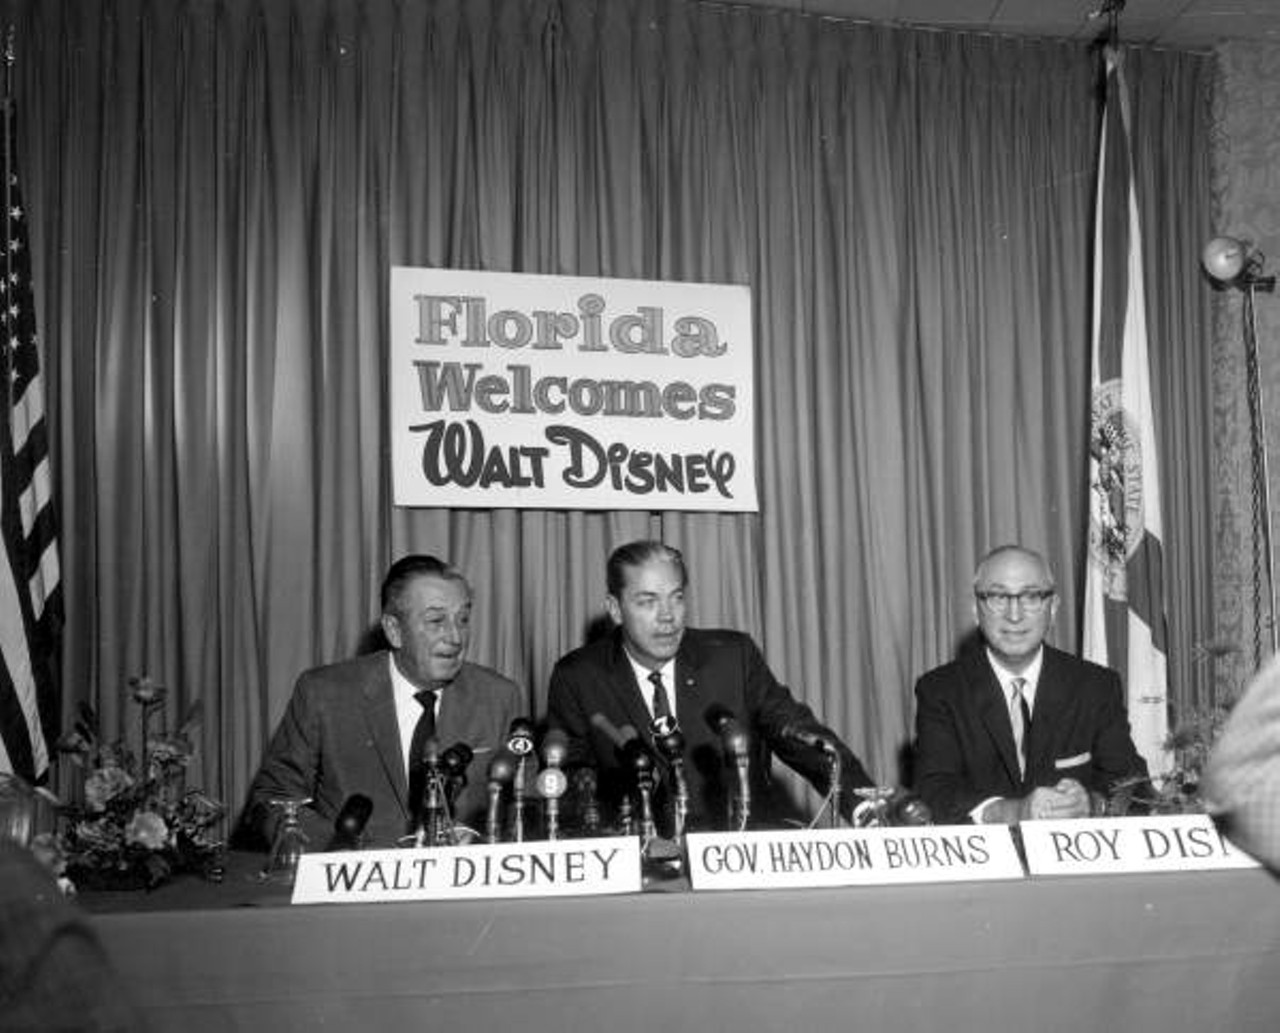 Walt Disney, Governor Burns, and Roy Disney at a press conference in Orlando (1965).